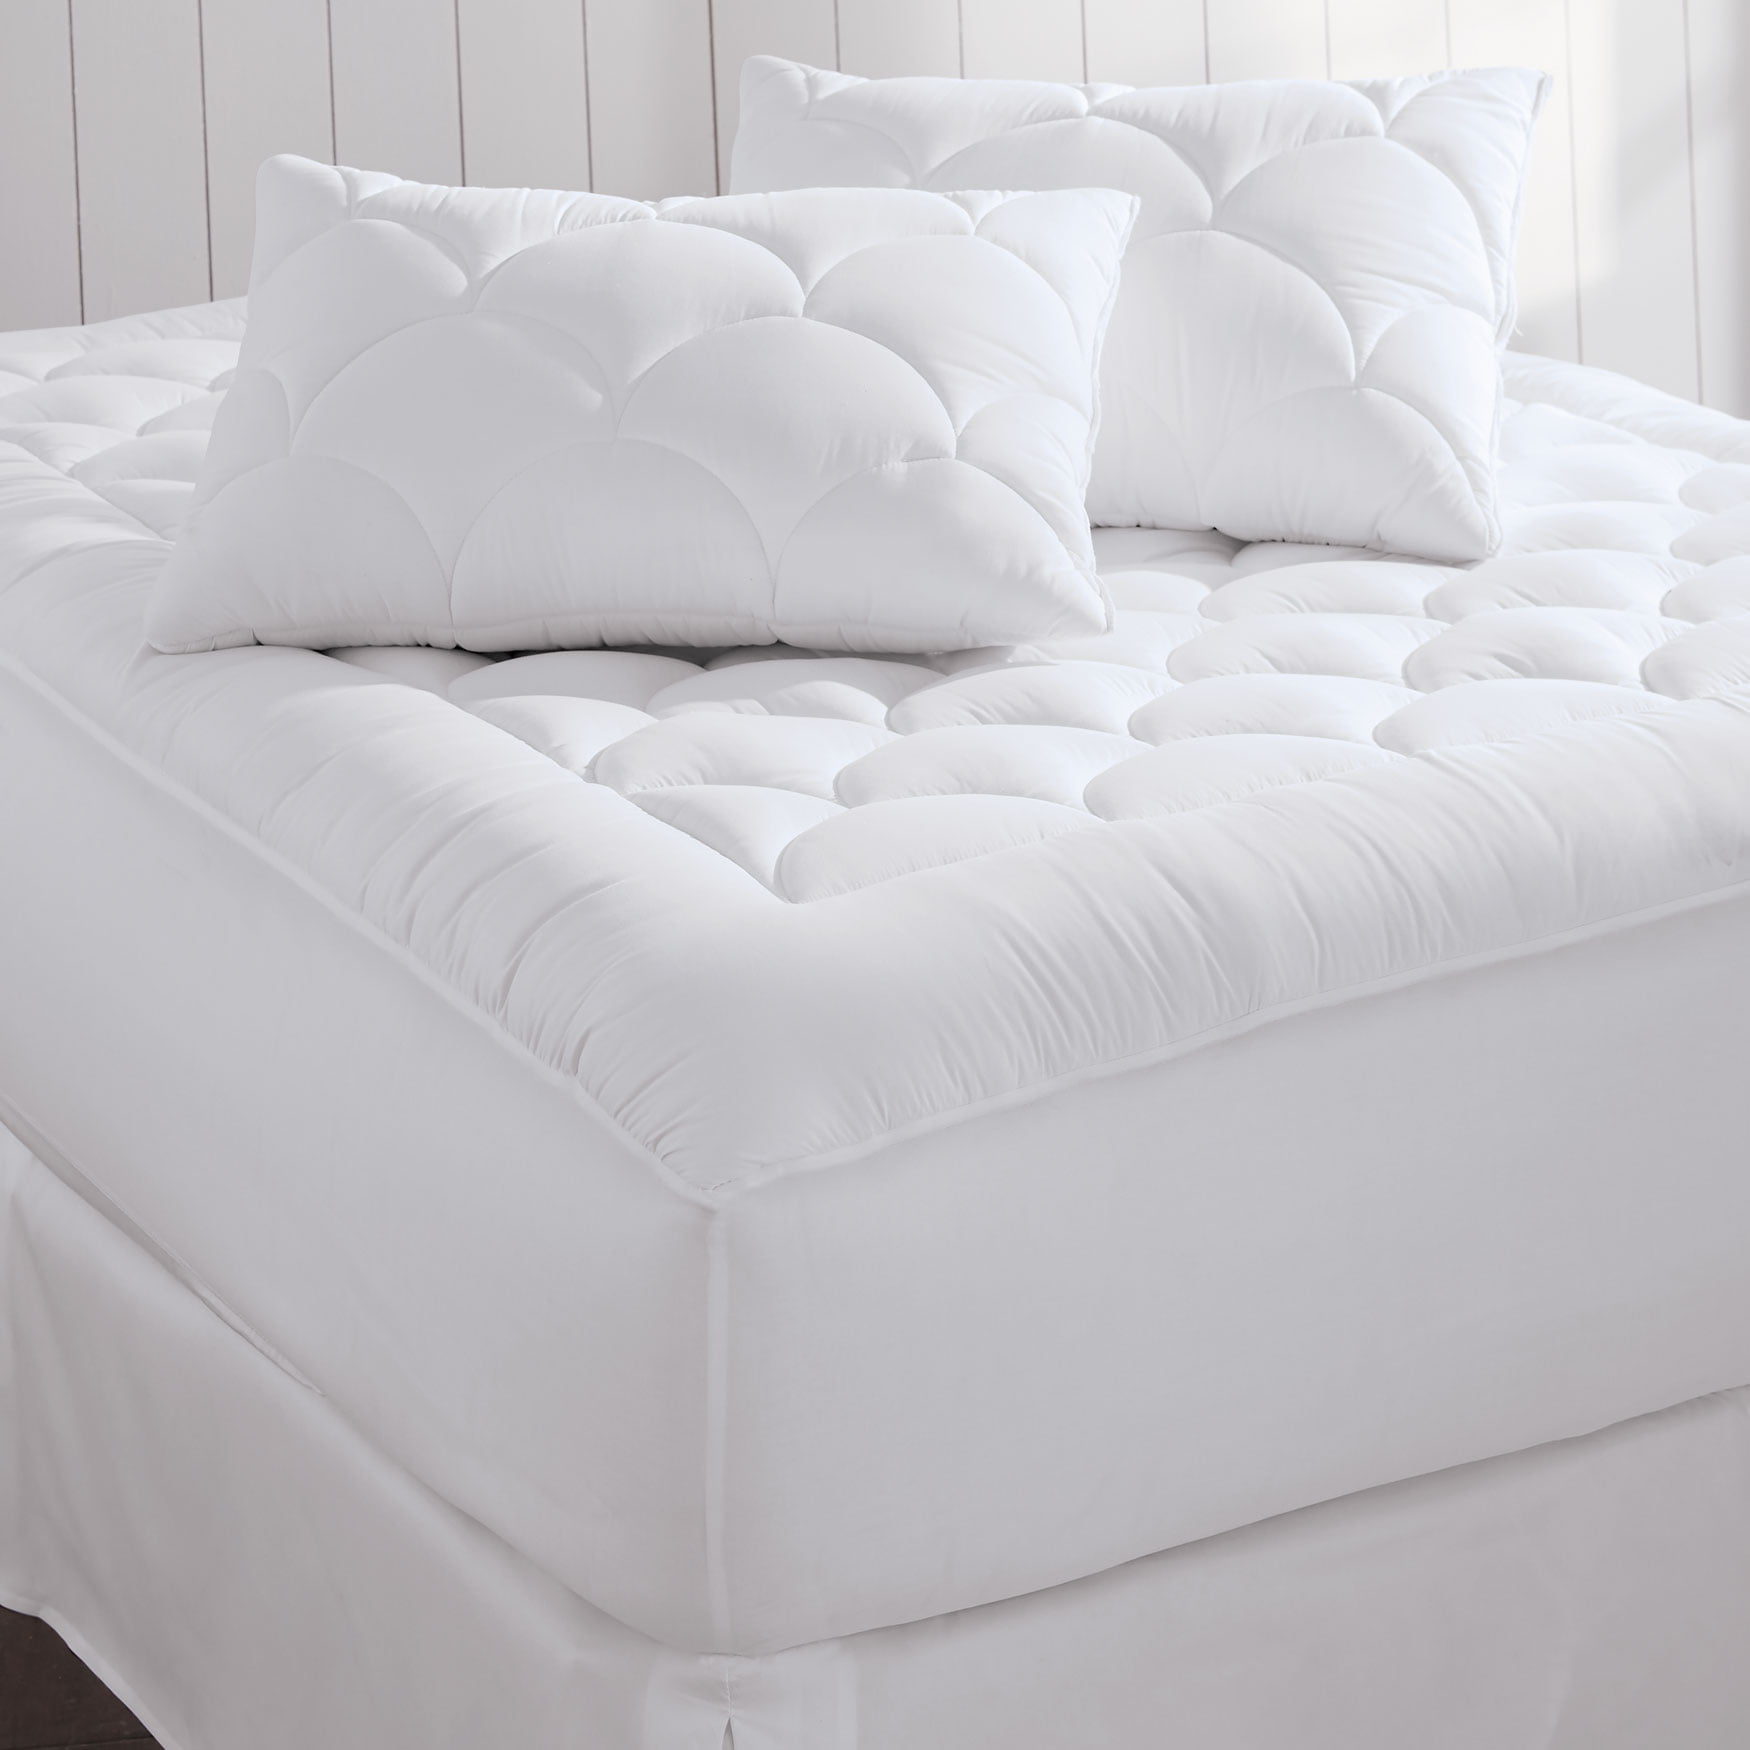 Super Soft Cover Mellanni Microplush Mattress Pad Protector Overfilled Topper 